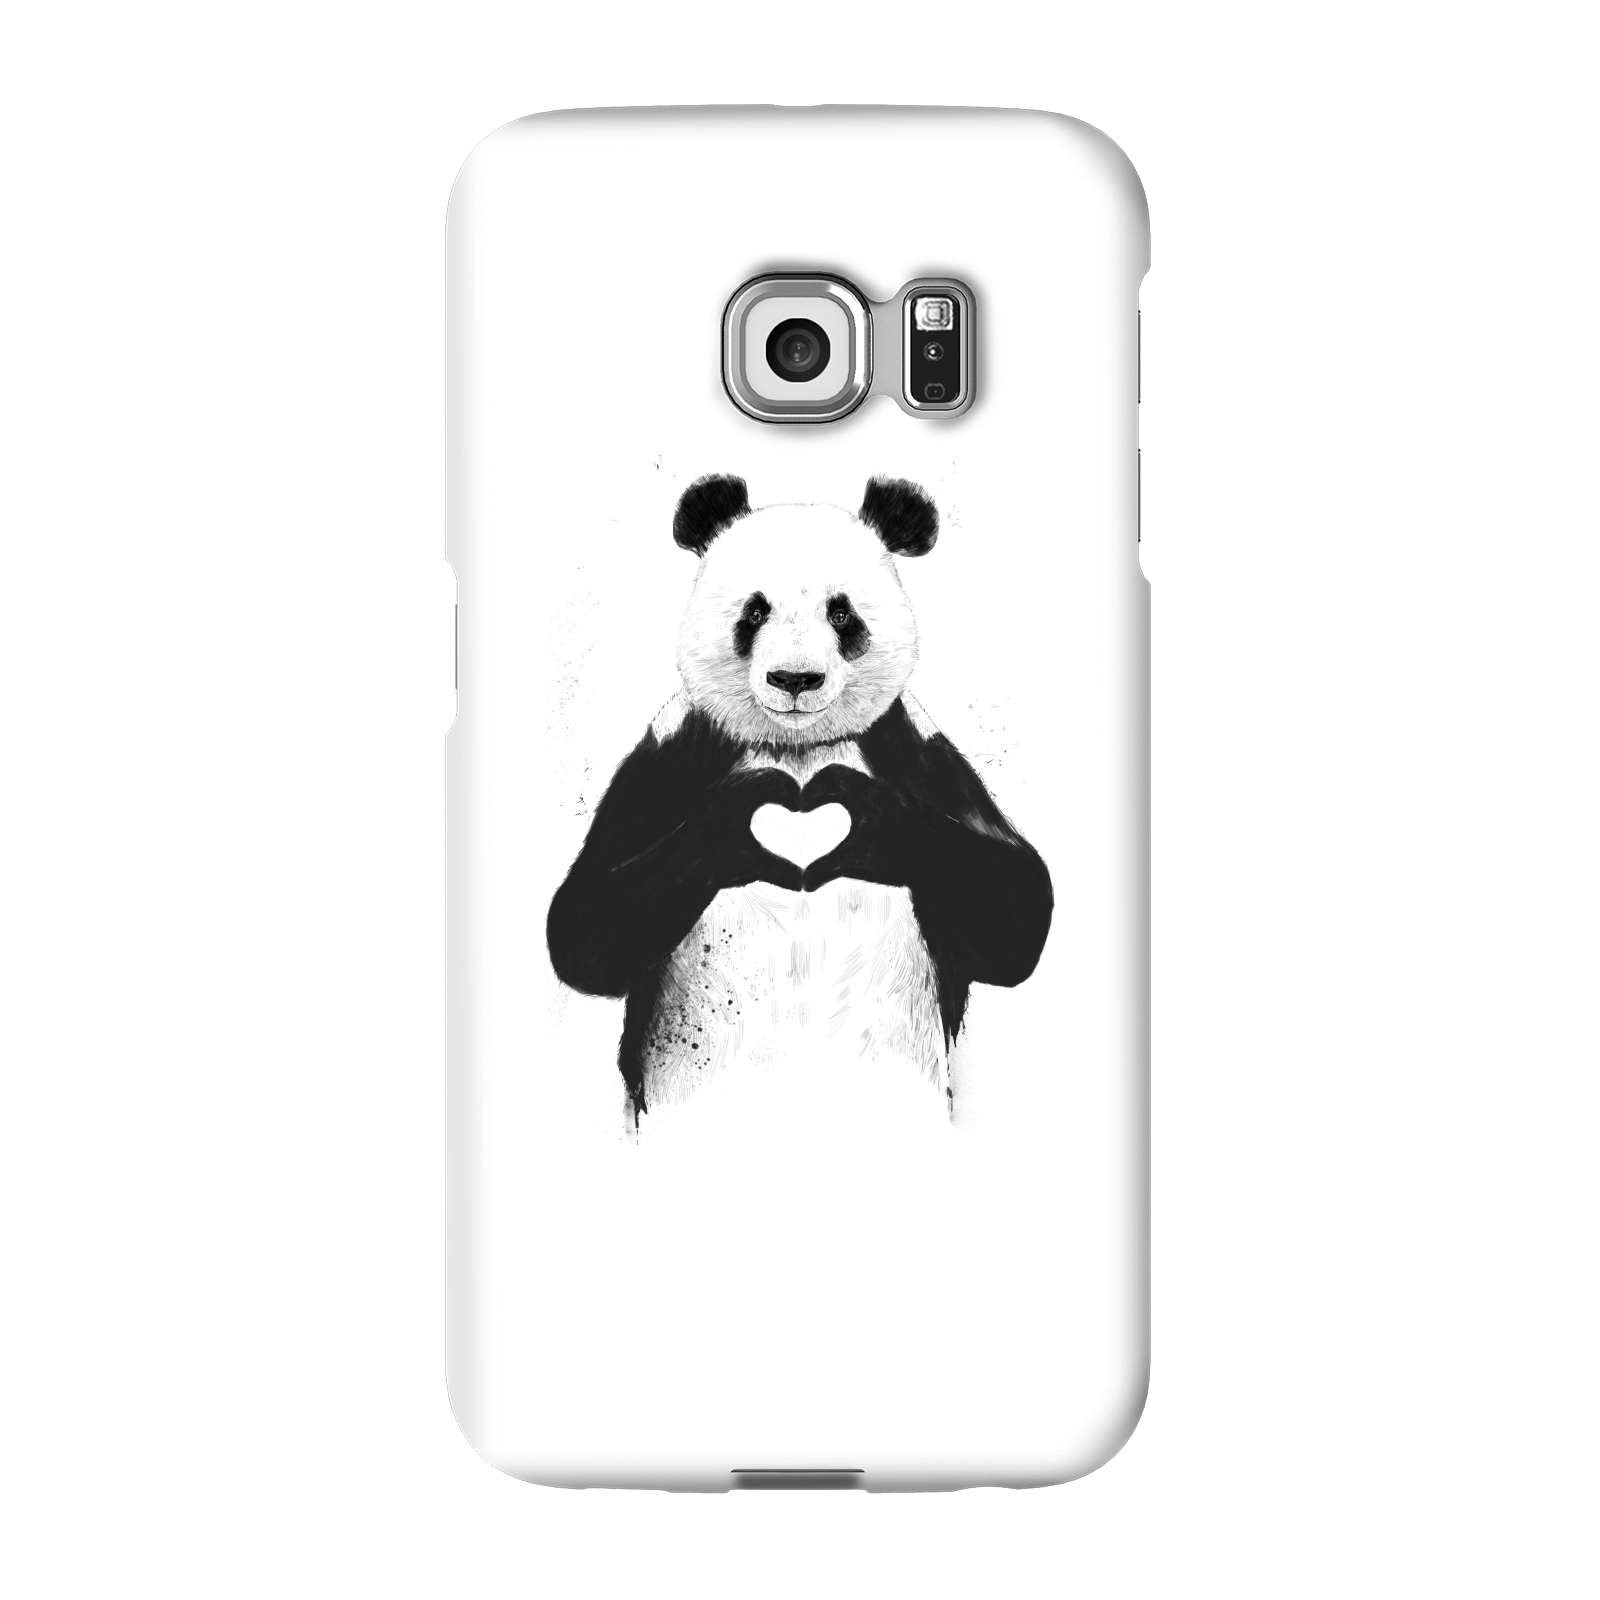 balazs solti panda love phone case for iphone and android - samsung s6 edge plus - snap case - gloss